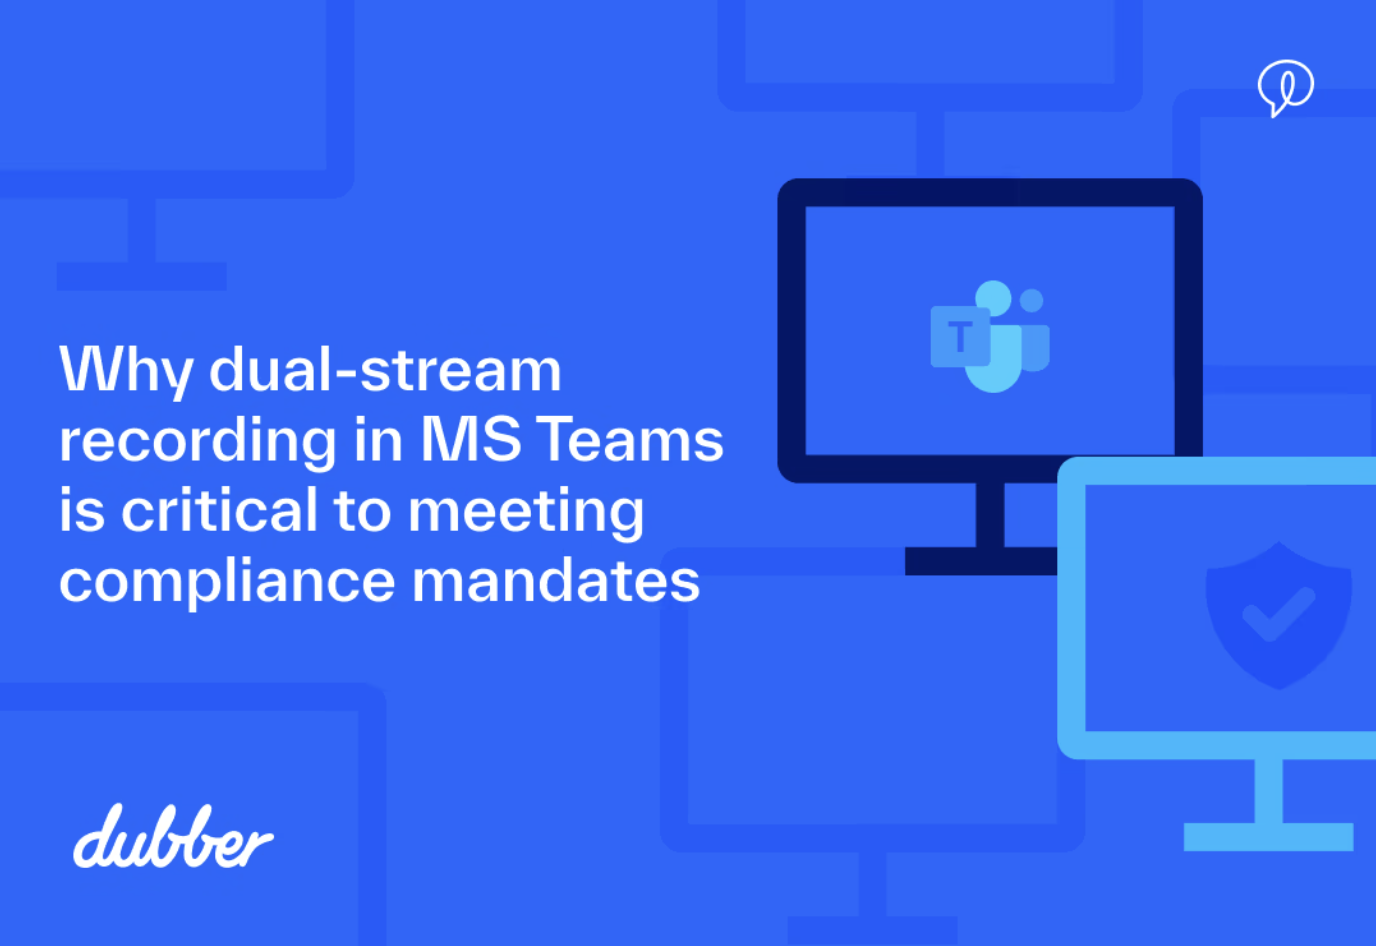 Why dual-stream recording in MS Teams is critical to meeting compliance mandates